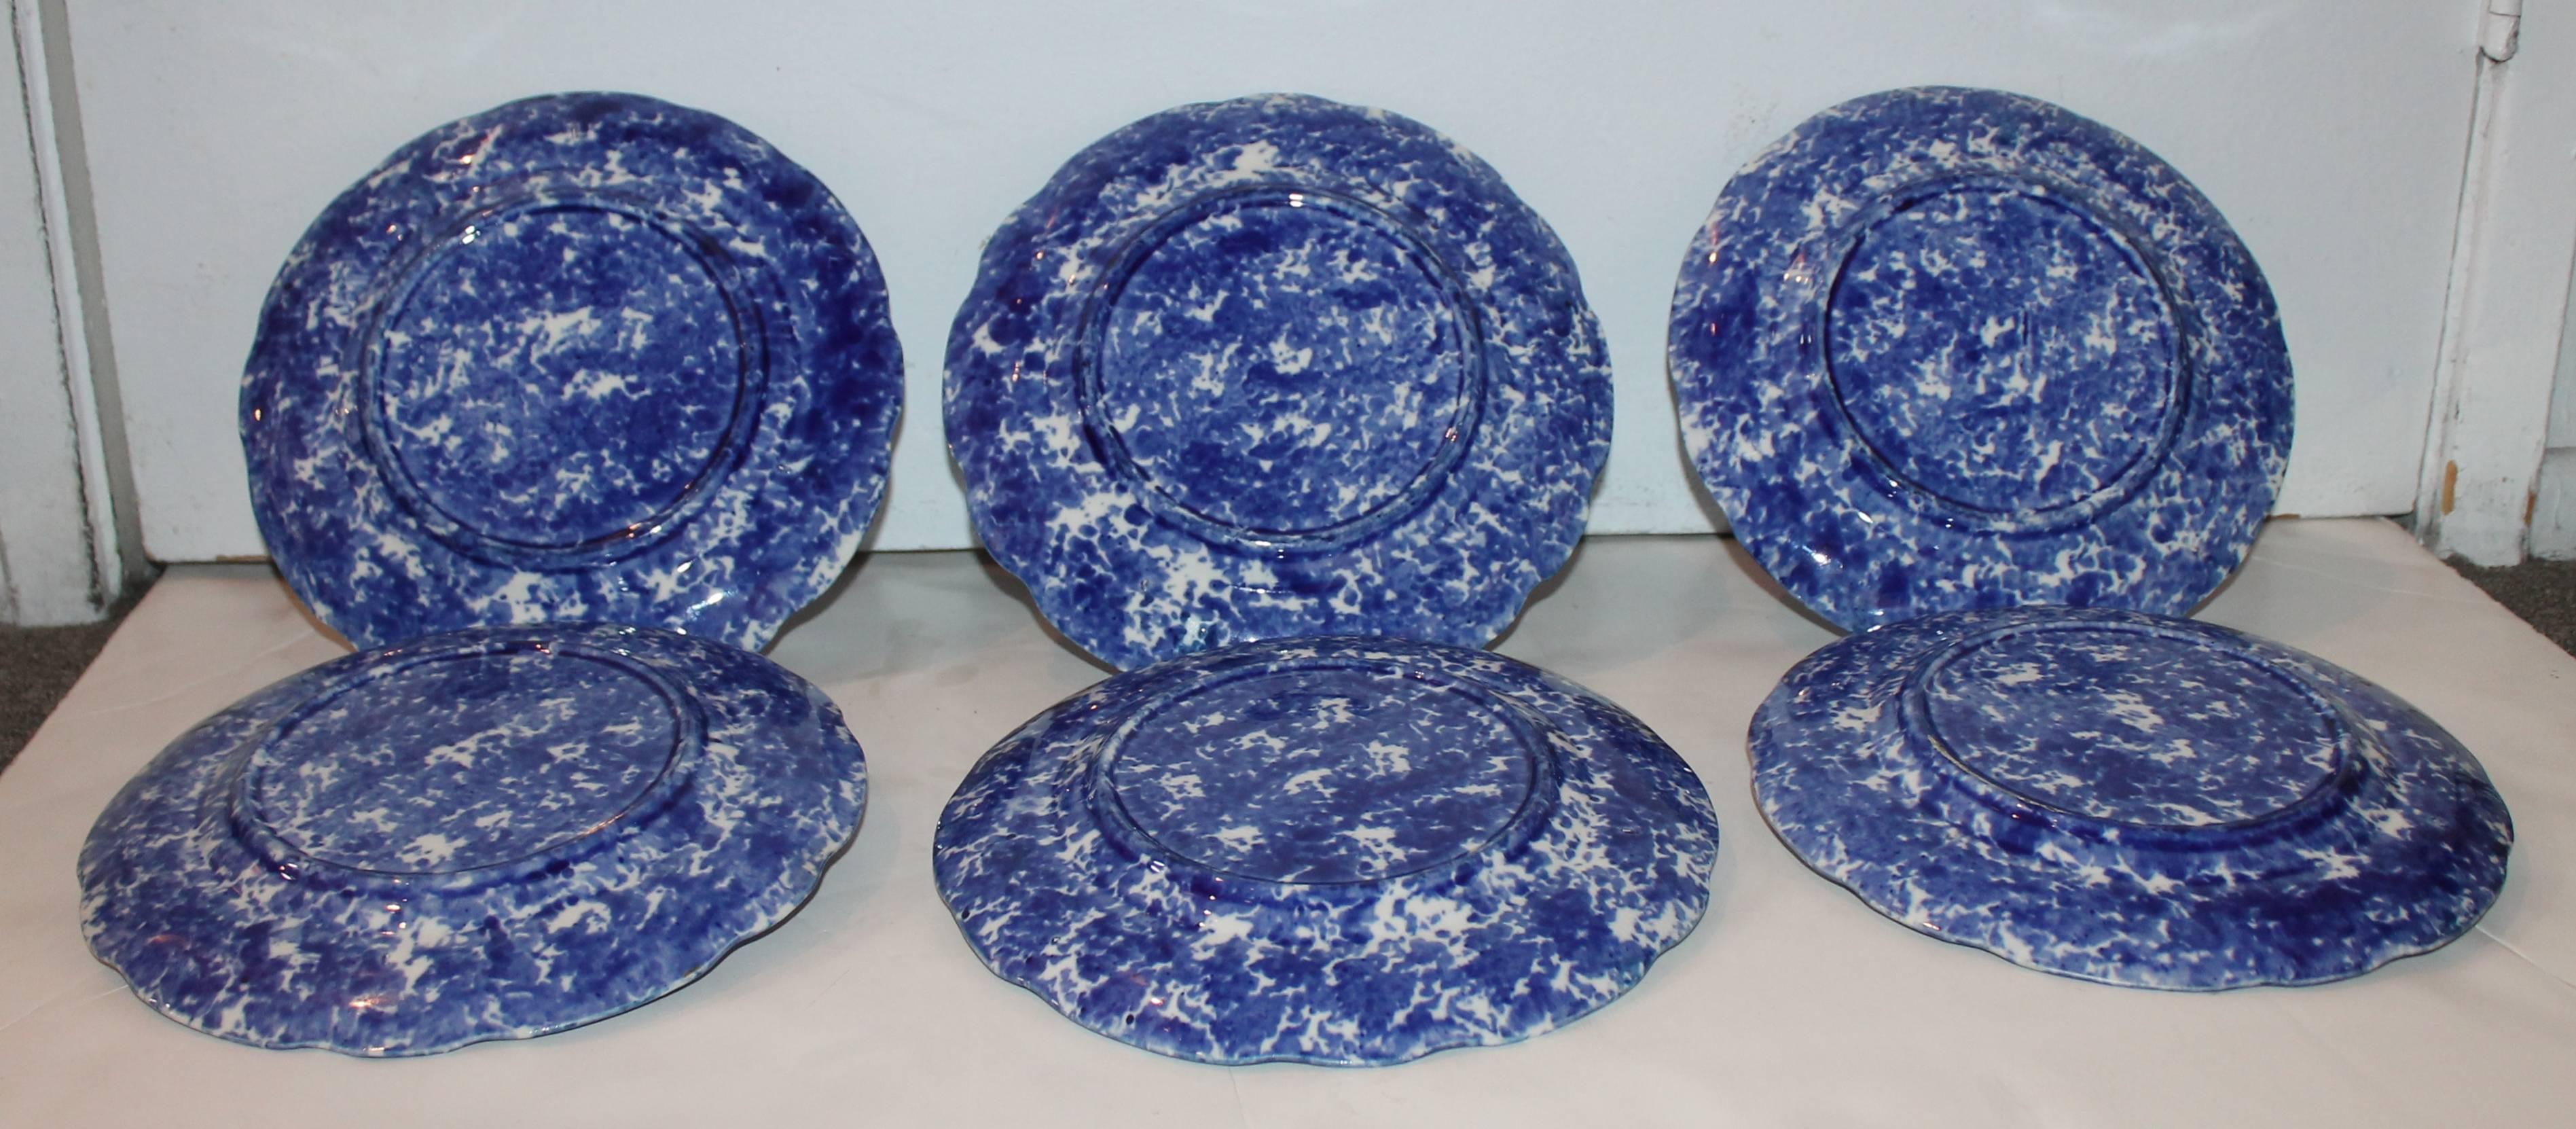 Country Rare Set of Six Matching 19th Century Sponge Ware Dinner Plates For Sale